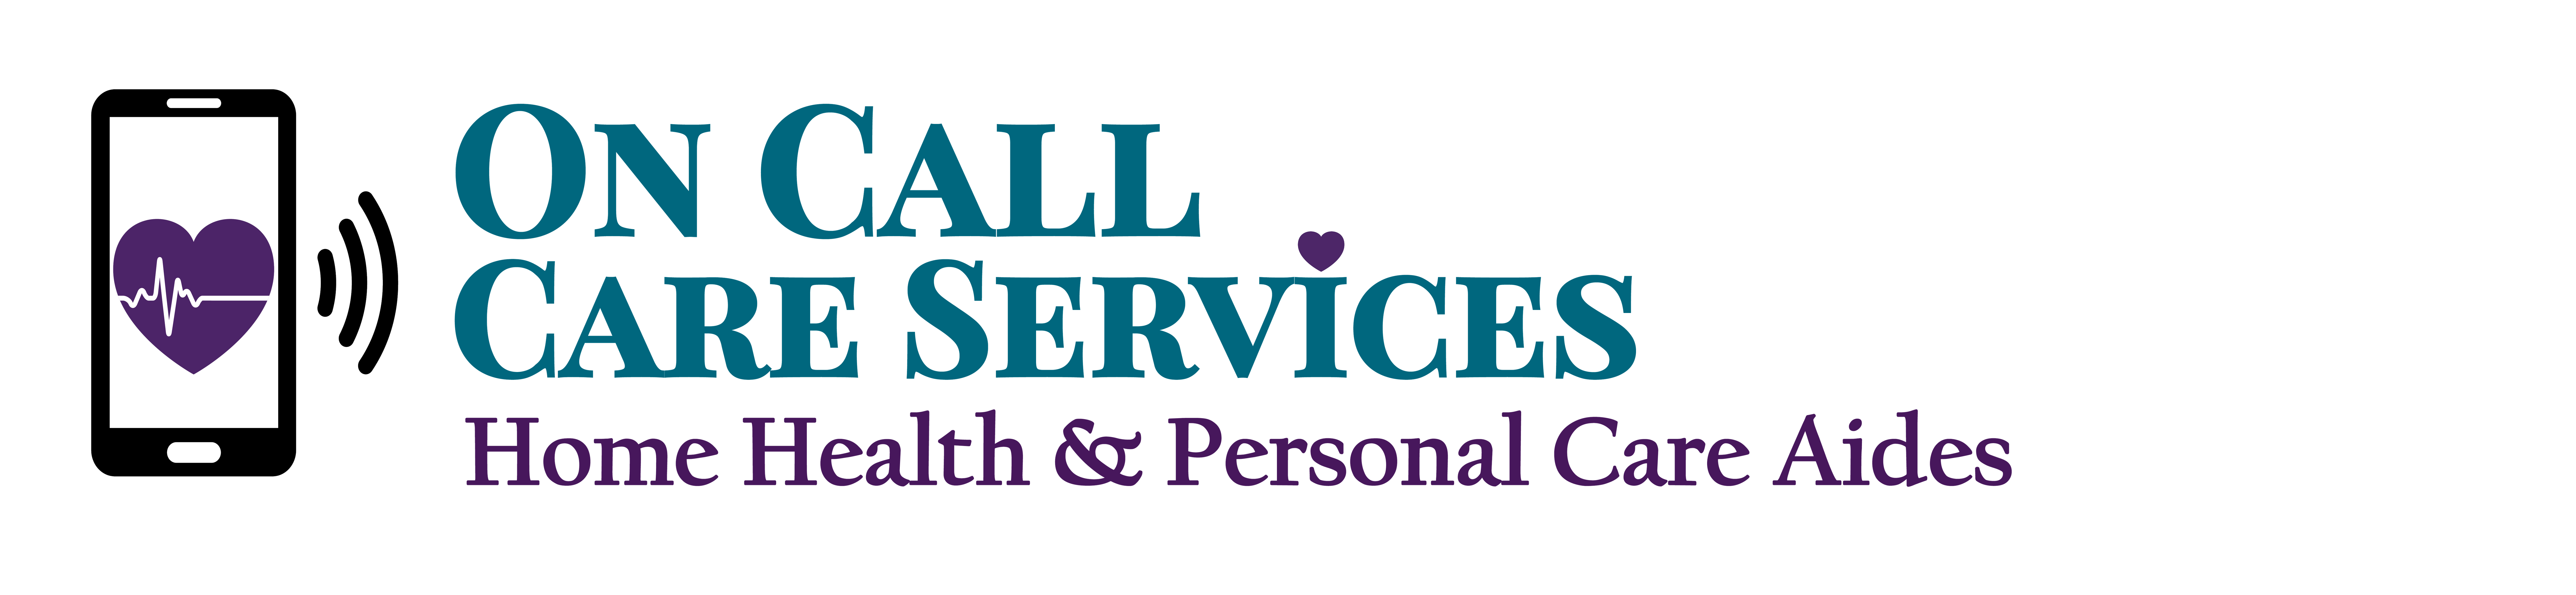 On Call Care Services